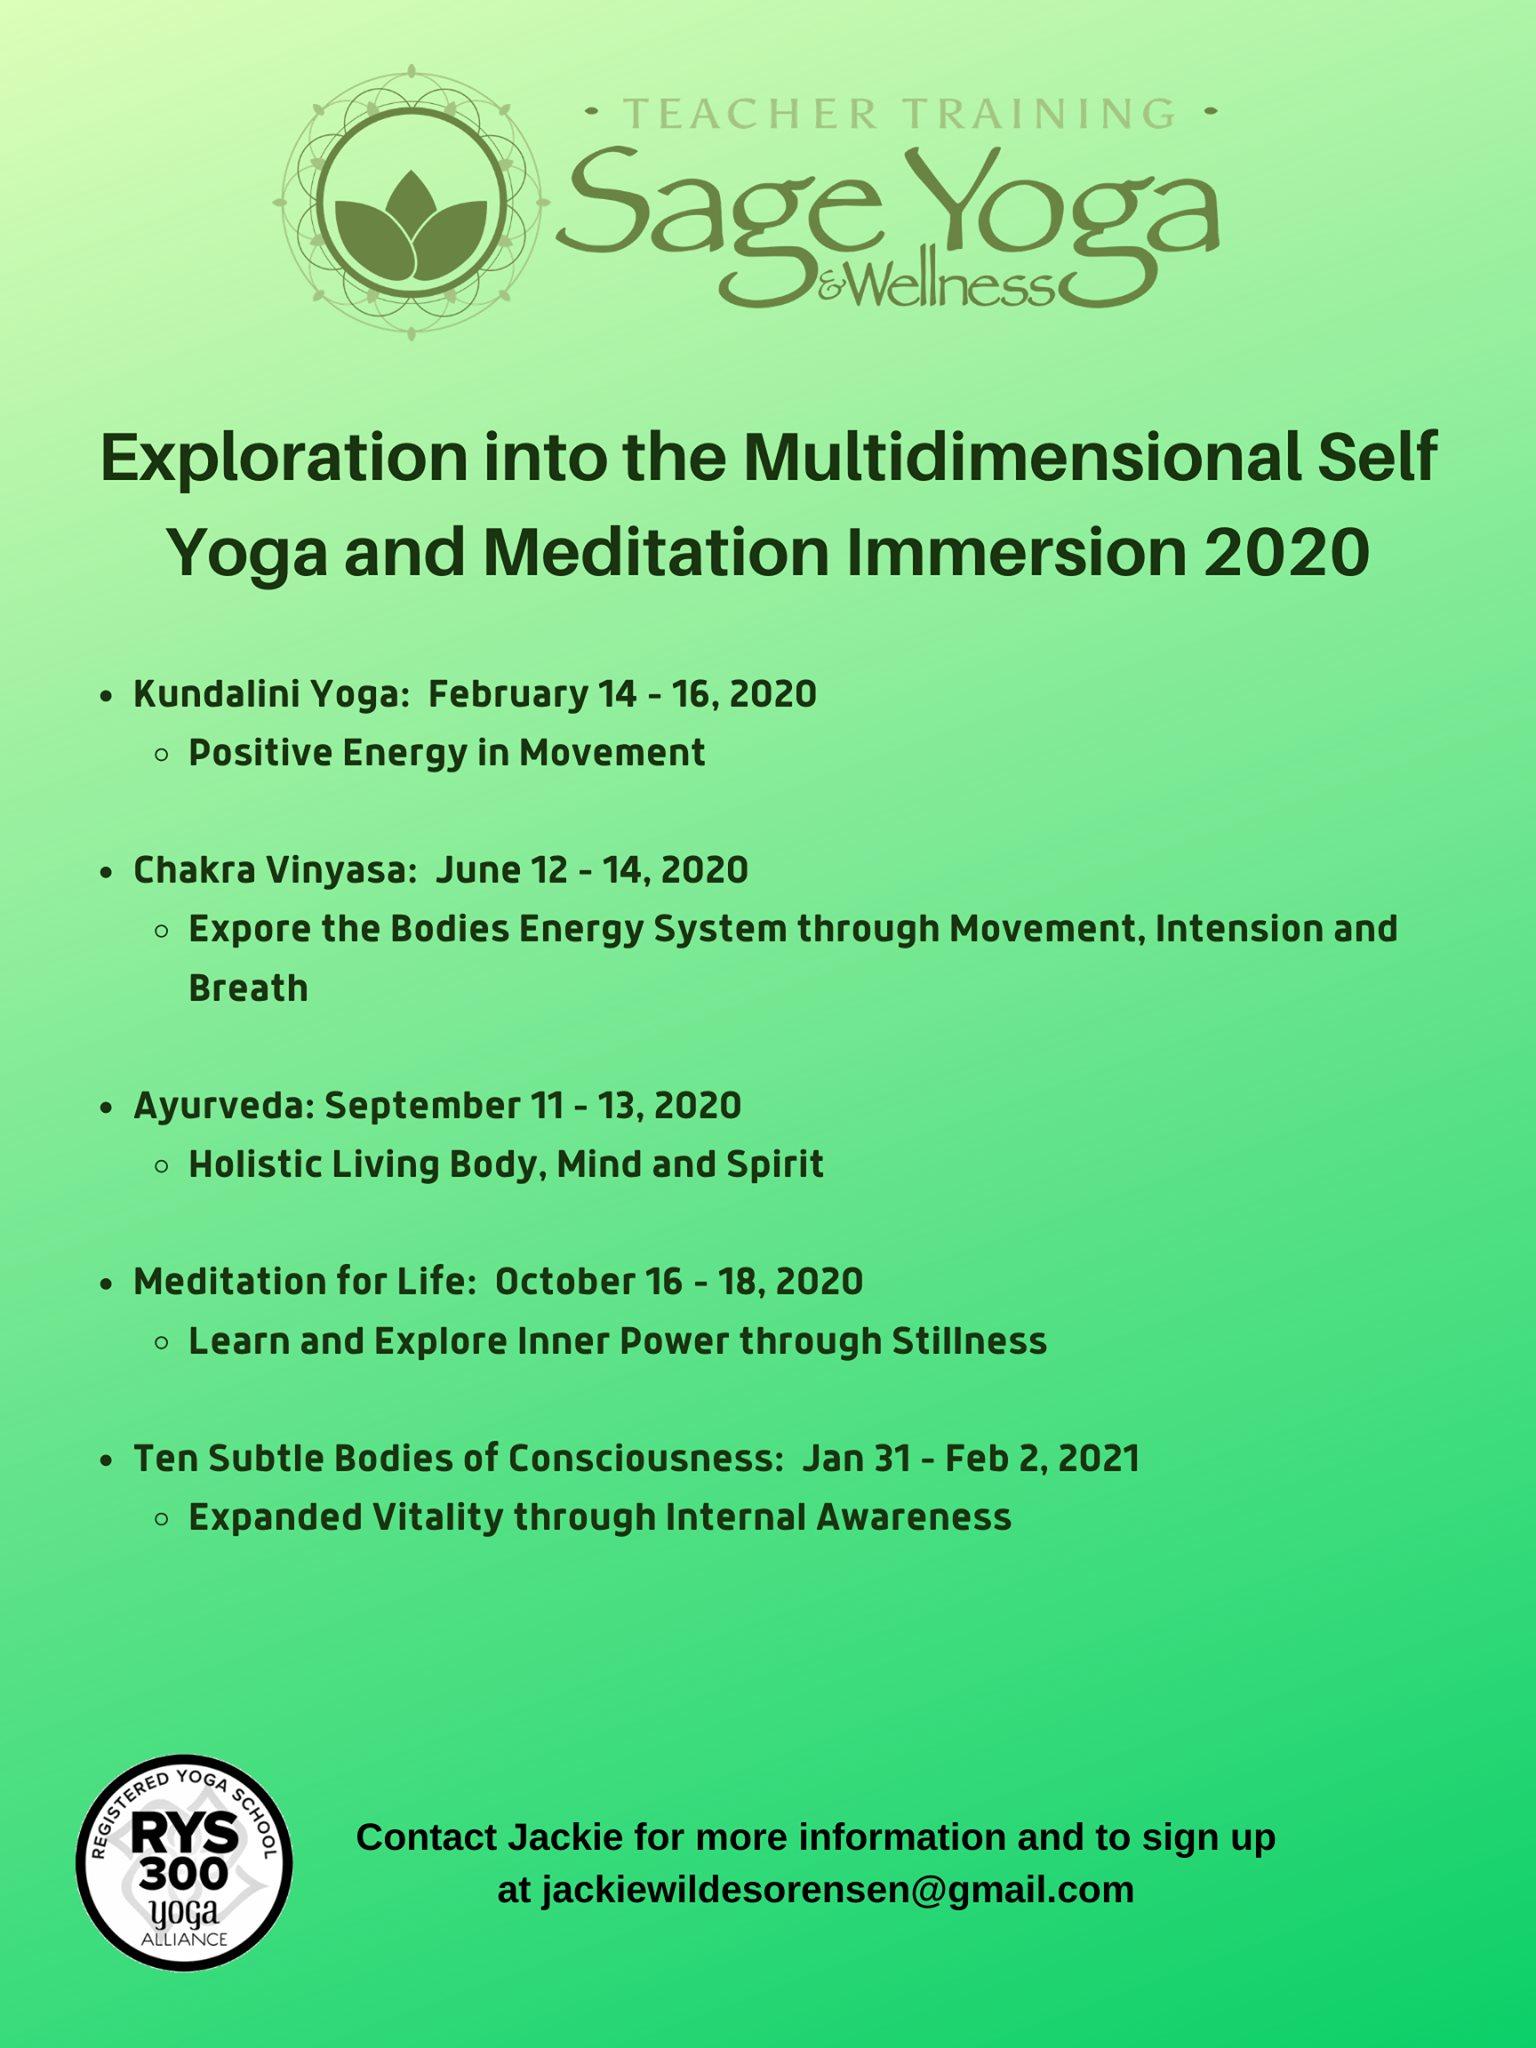 Yoga and Meditation Immersion 2020/21